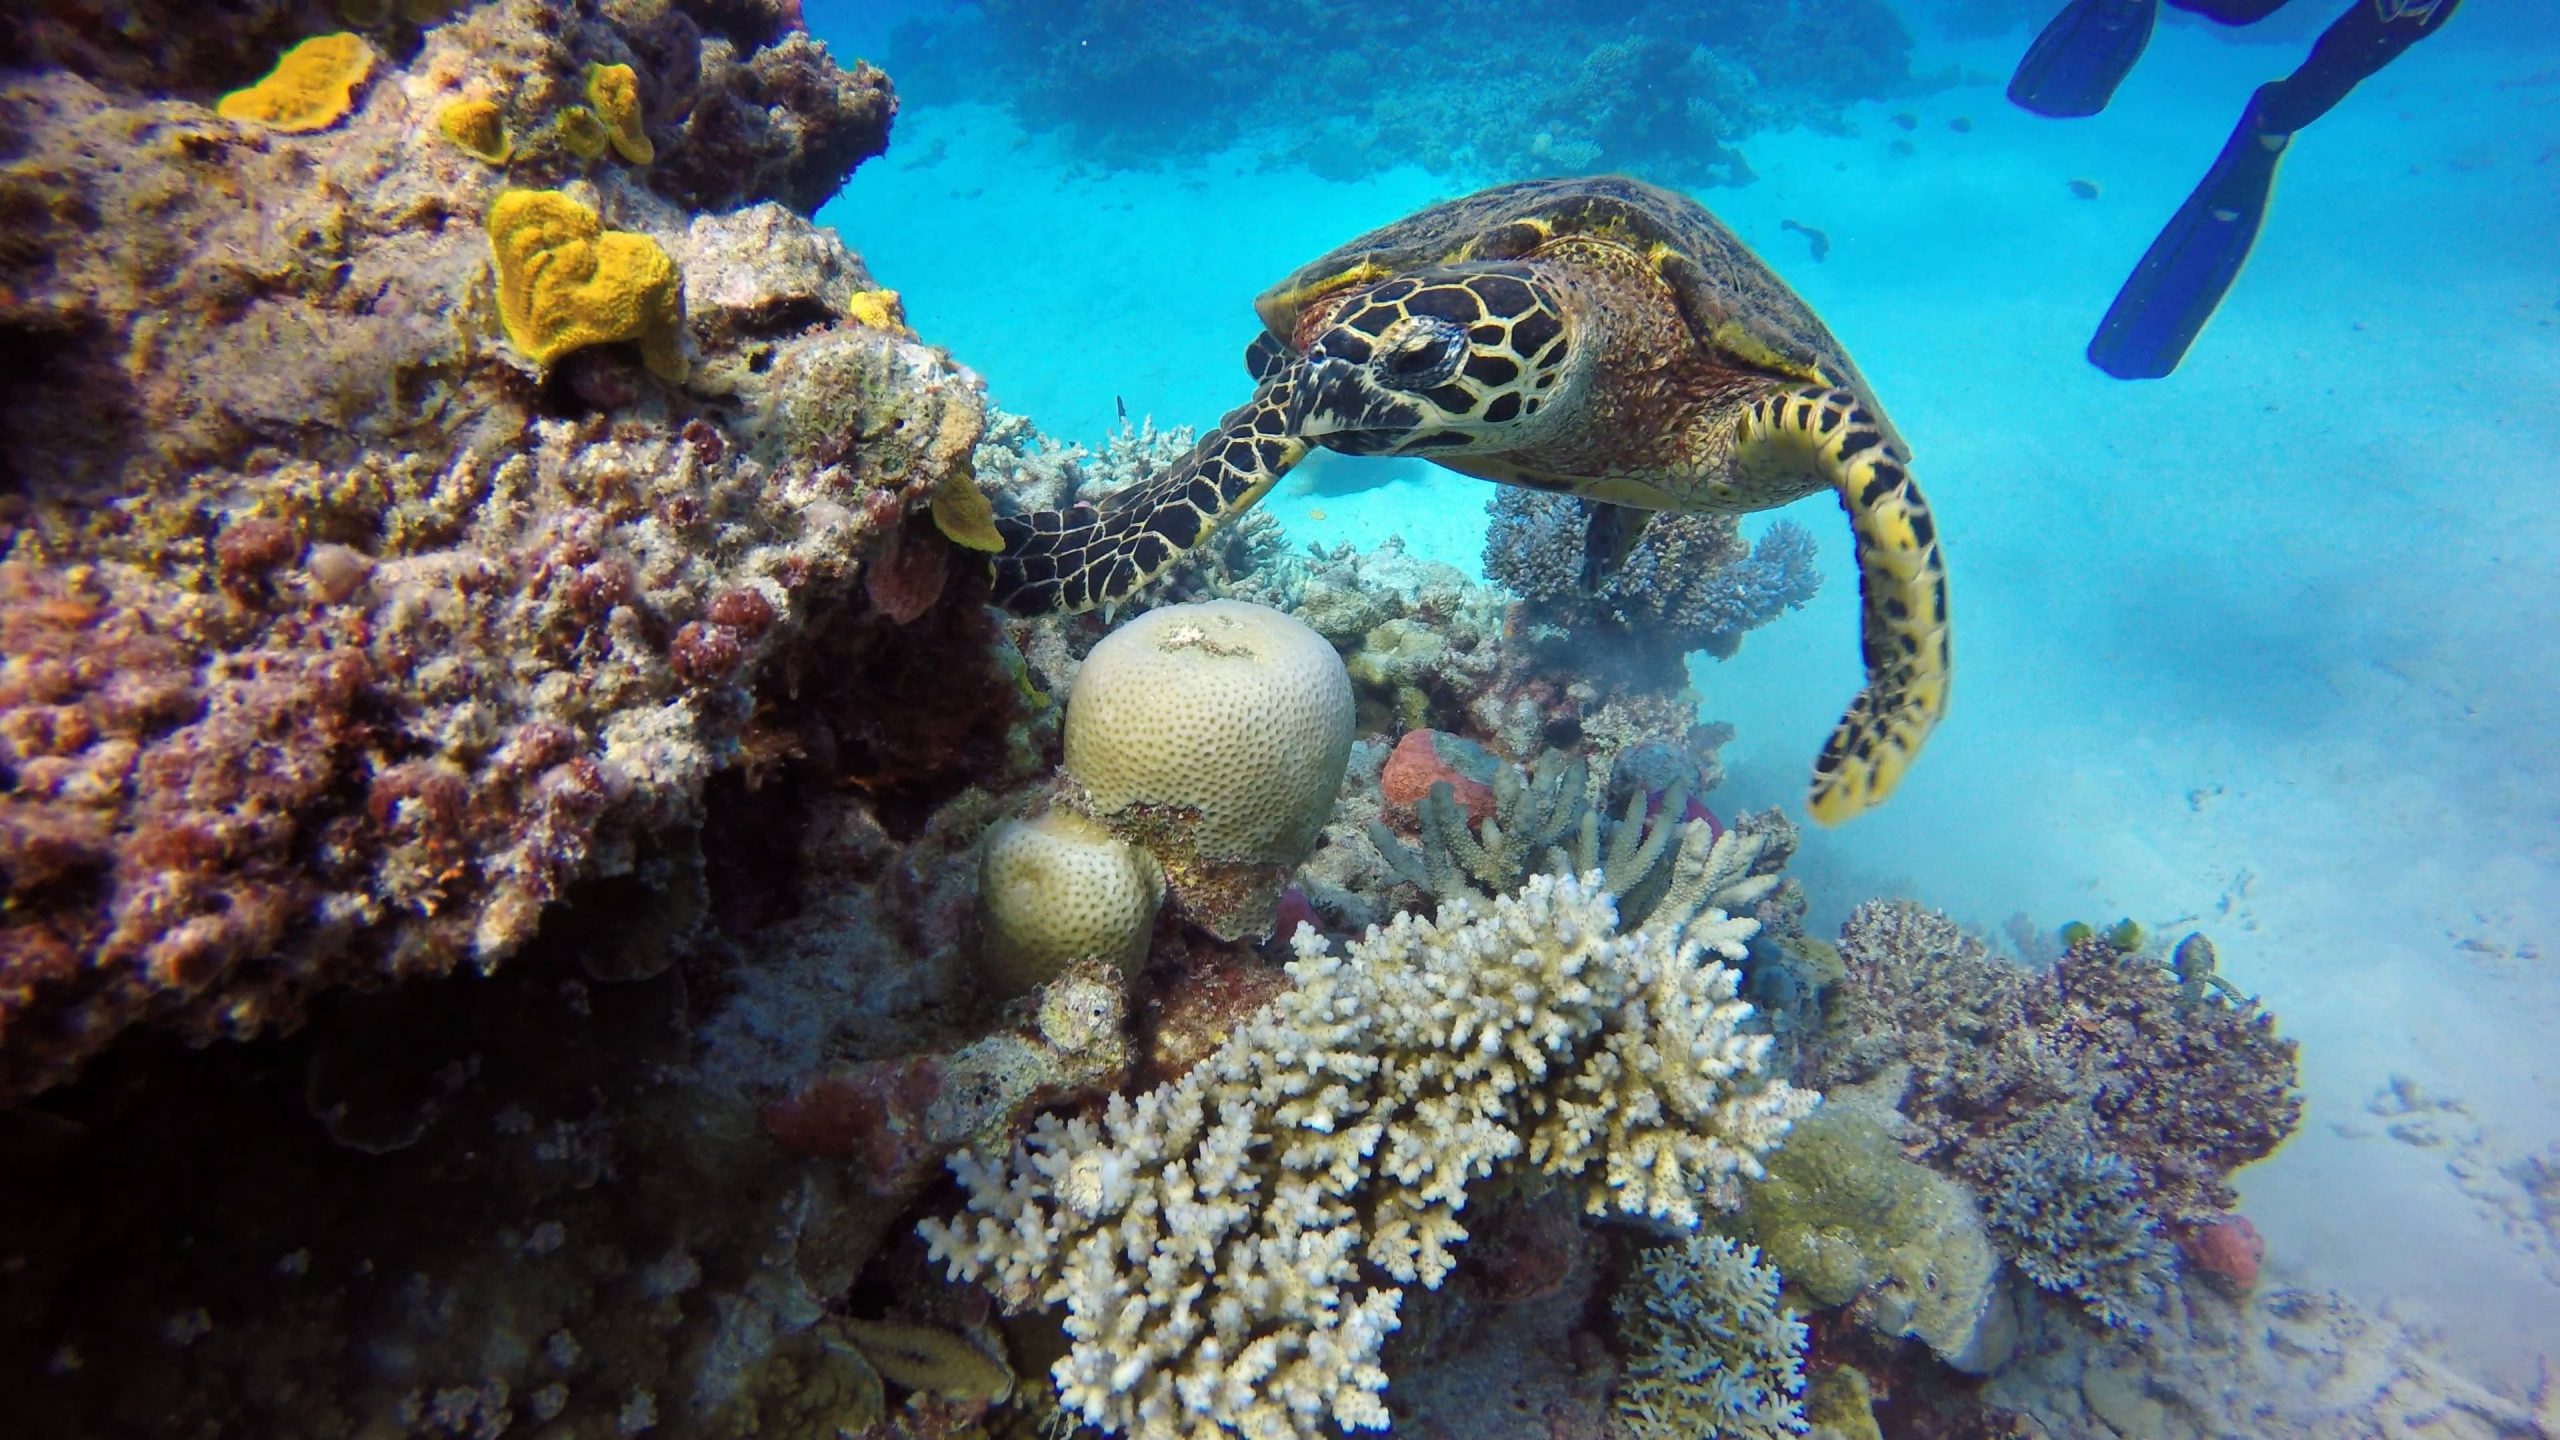 A turtle swimming by some coral in the Great Barrier Reef, Australia